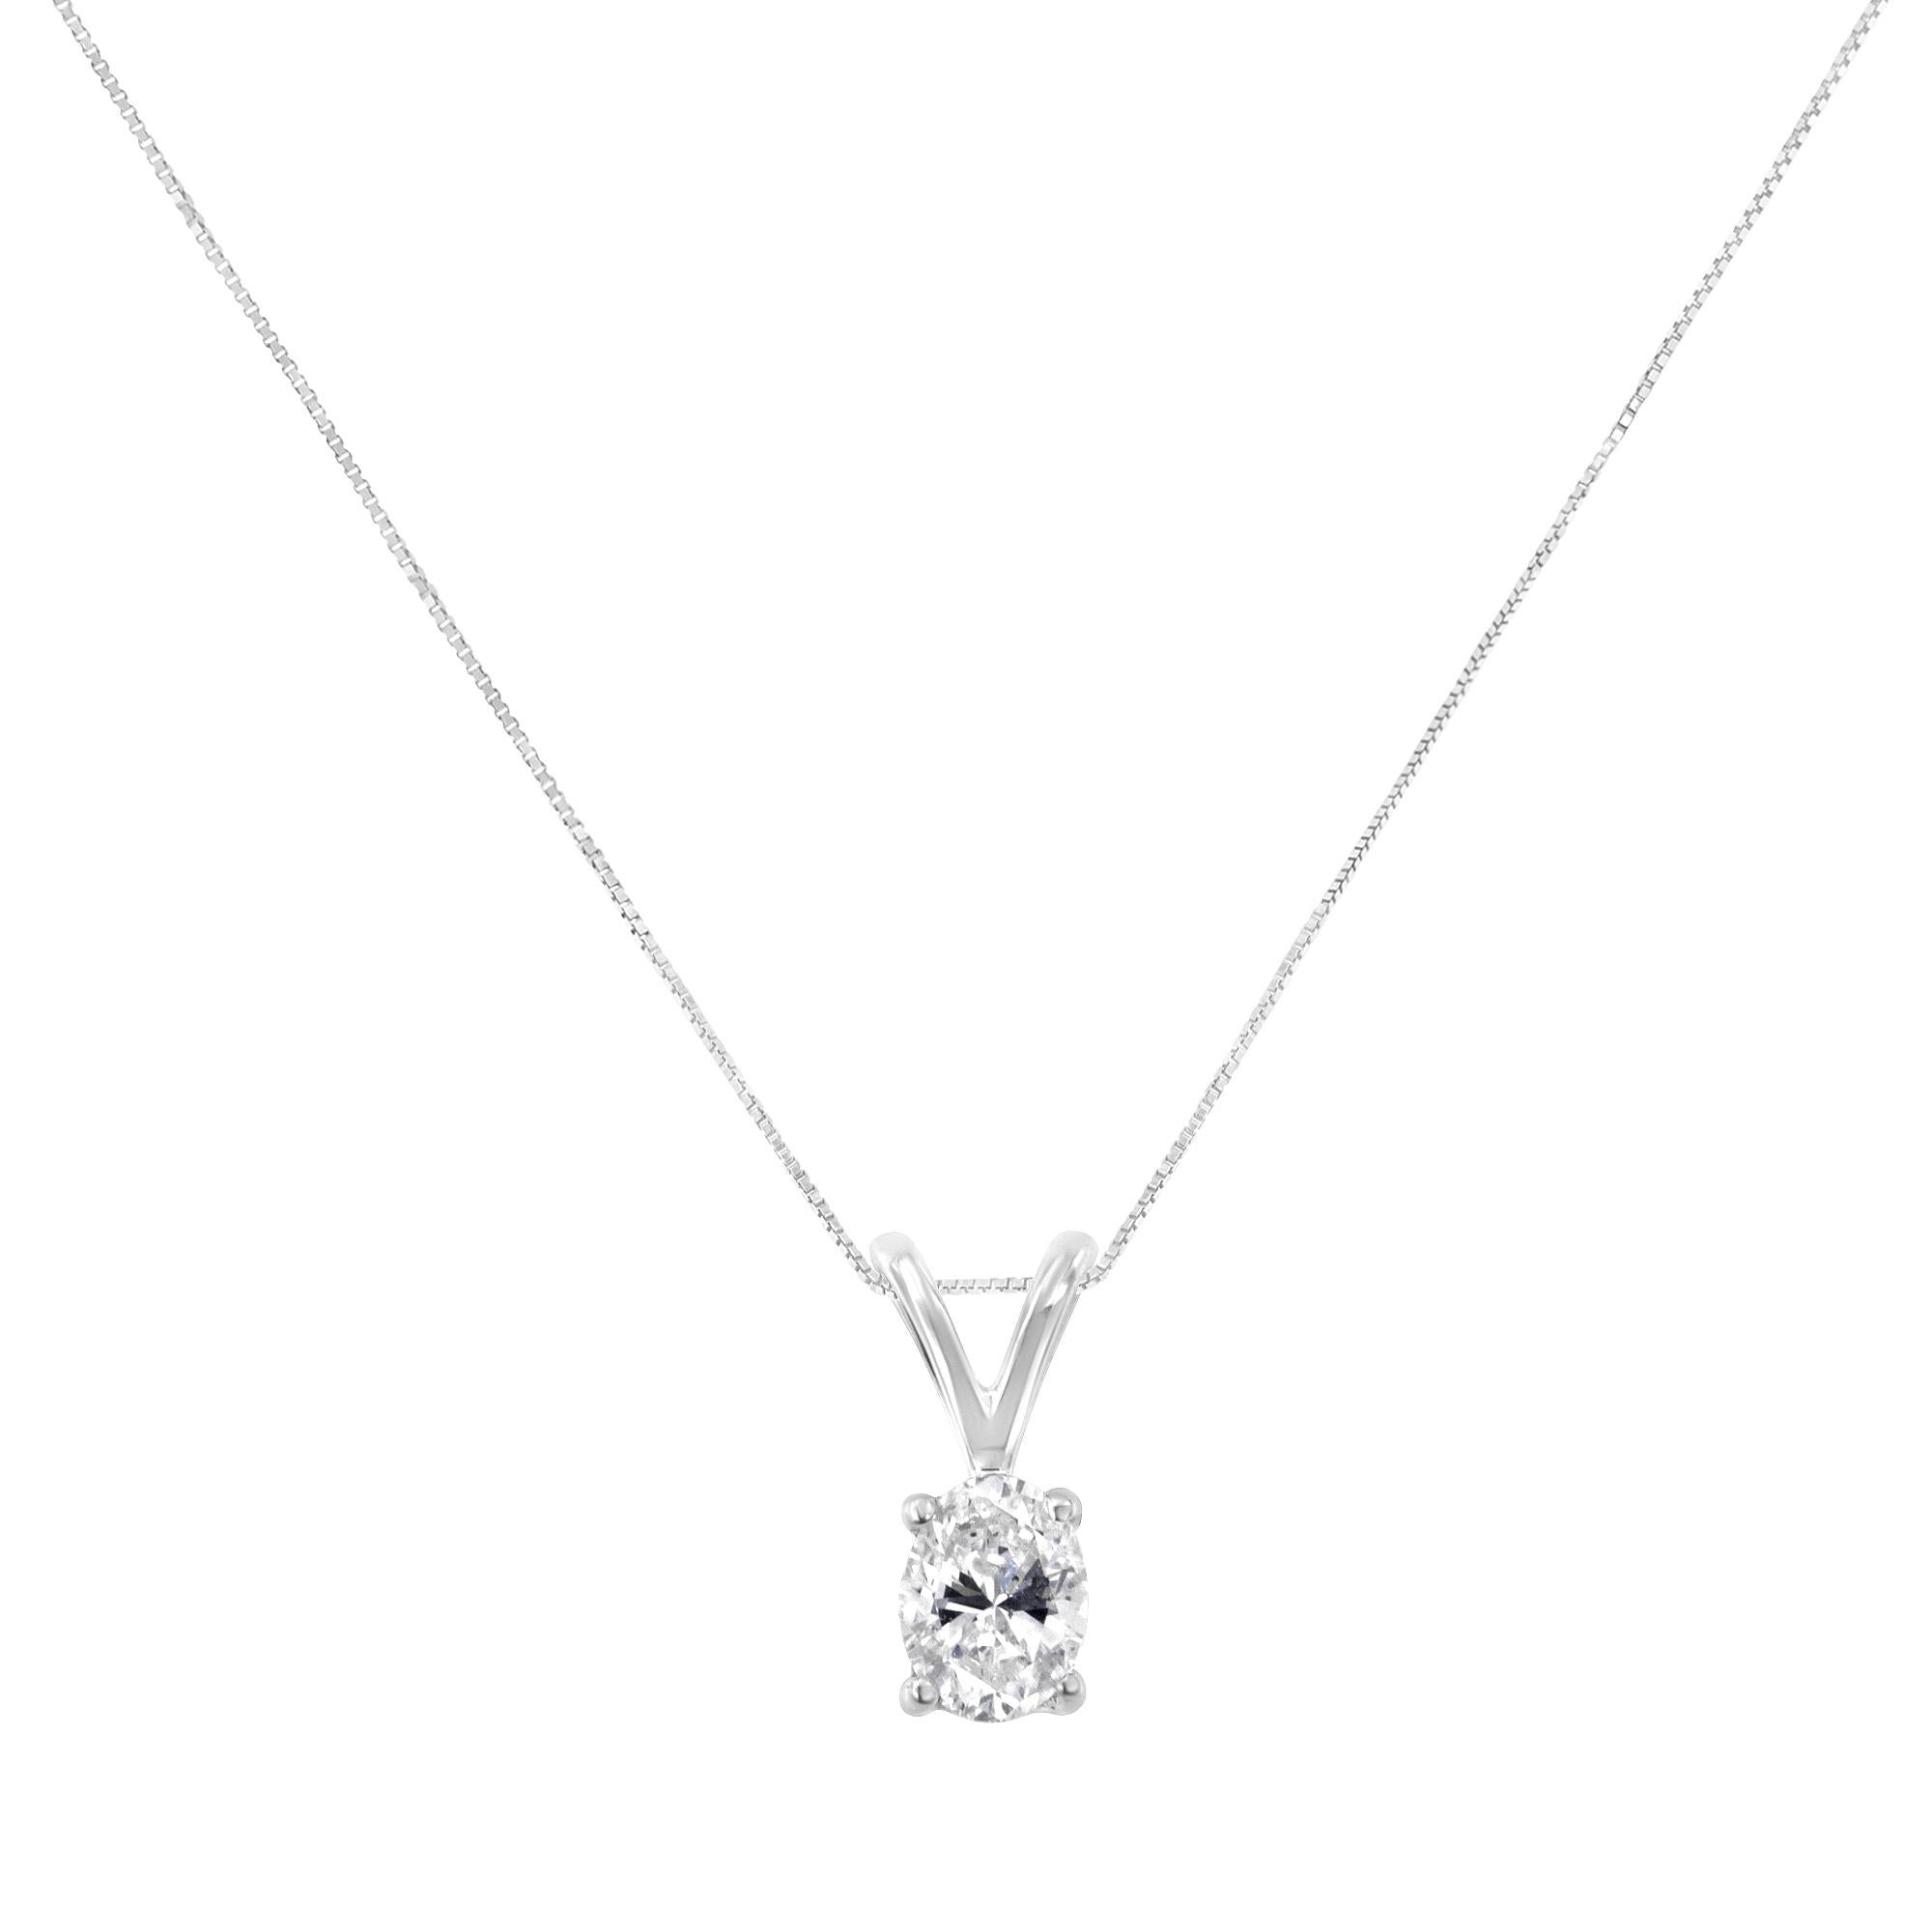 This IGI certified 14k white gold pendant necklace showcases a single, glistening 1/5ct TDW solitaire oval diamonds This fabulous solitaire stud design has a simple four prong setting that allows the oval diamond to be the centerpiece of this